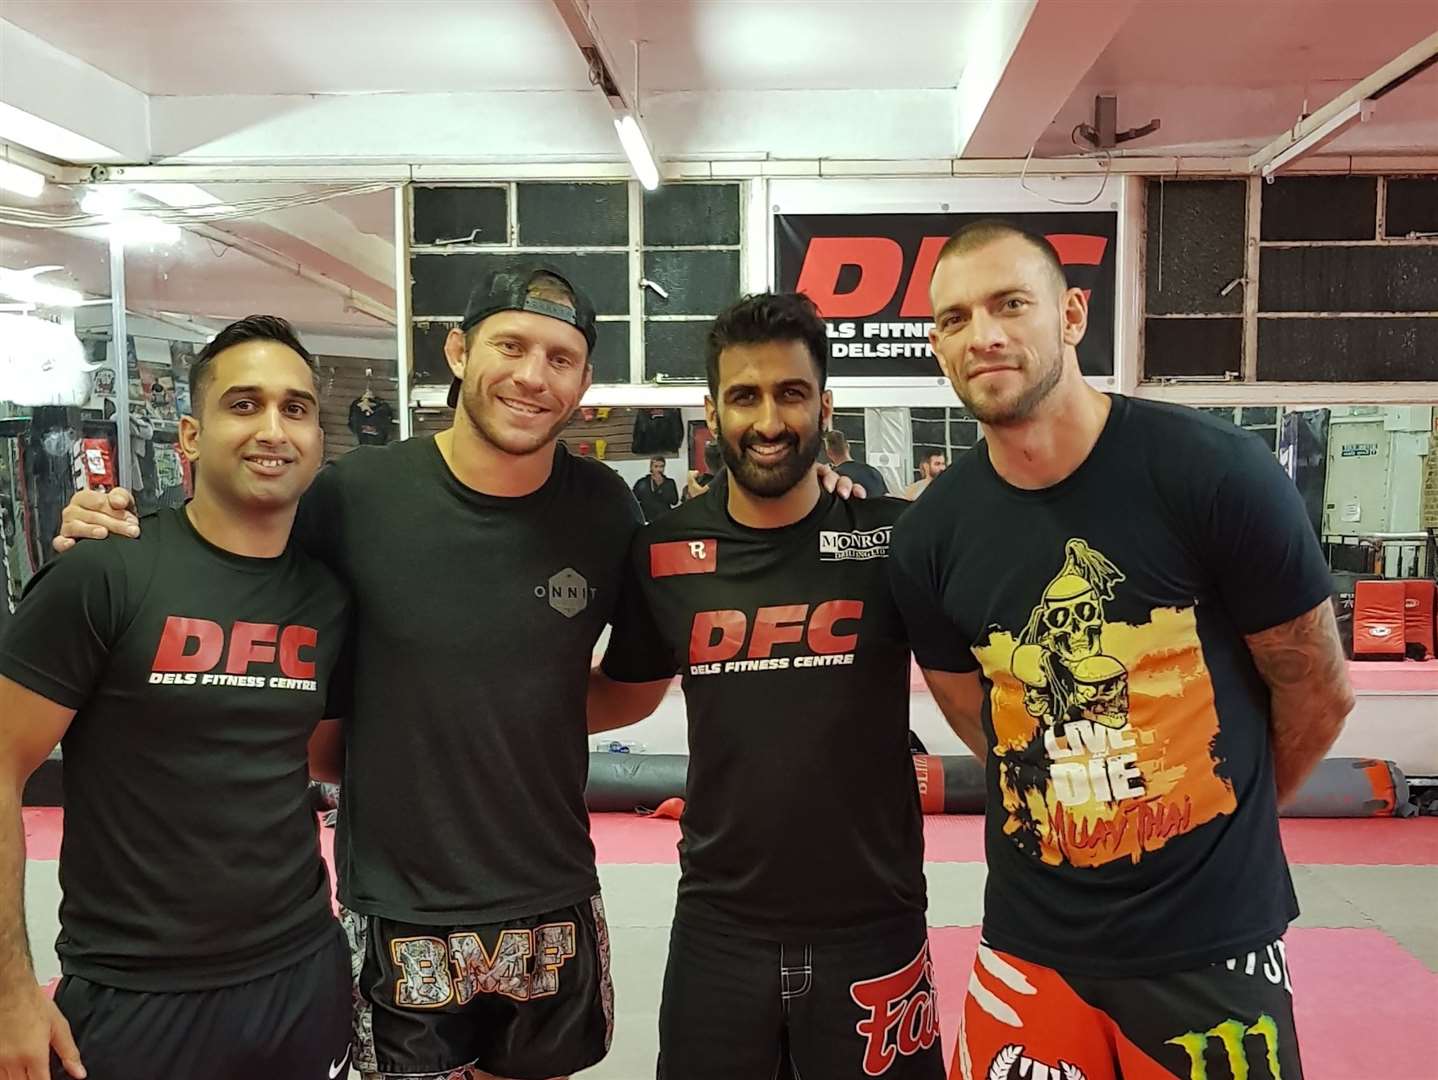 Danny Dhell (left) with UFC's Donald 'Cowboy' Cerrone, Ricky Dhell and Joe Schilling in 2017.